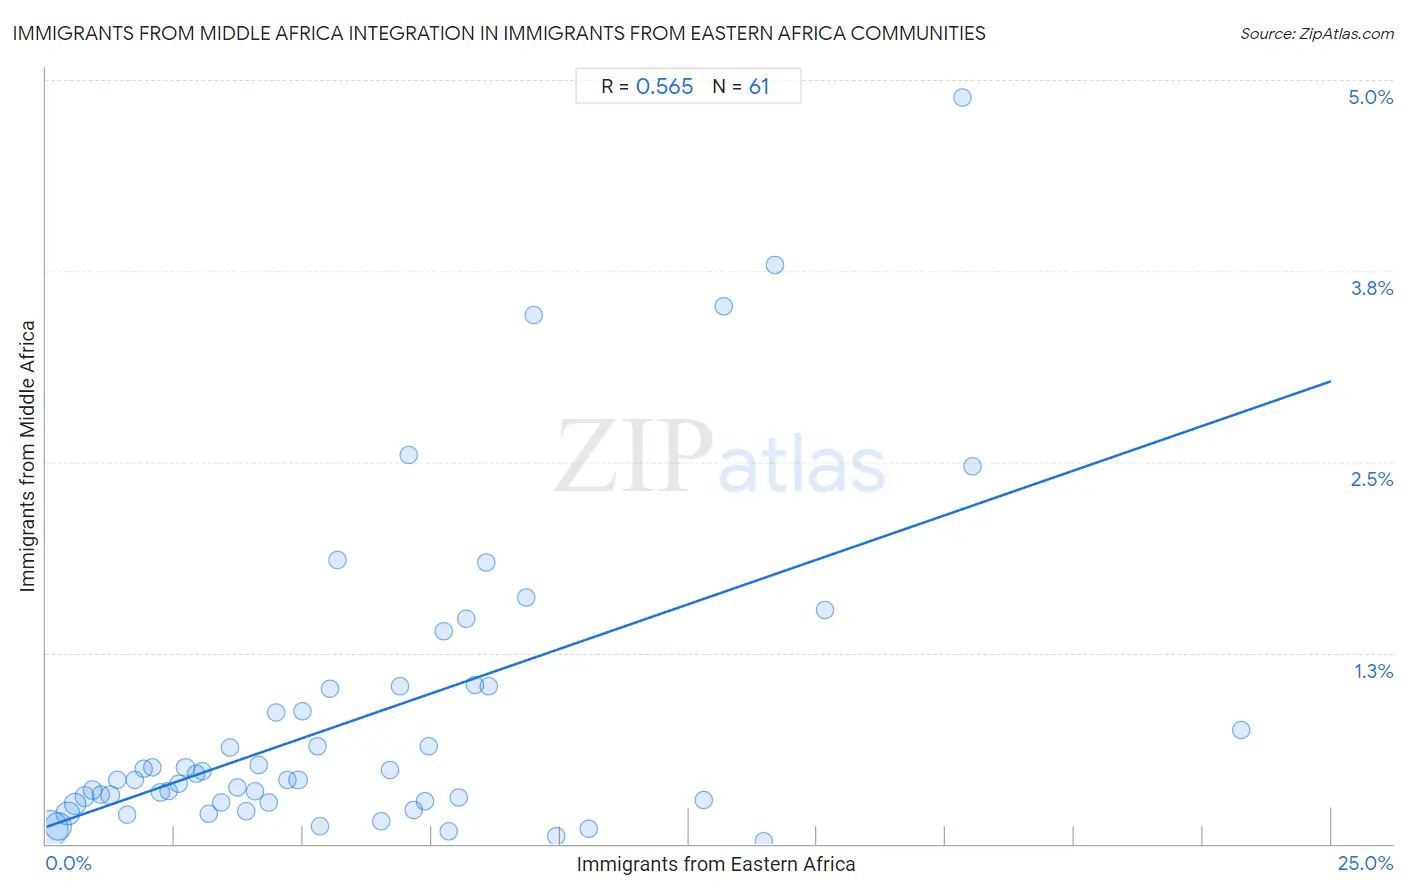 Immigrants from Eastern Africa Integration in Immigrants from Middle Africa Communities